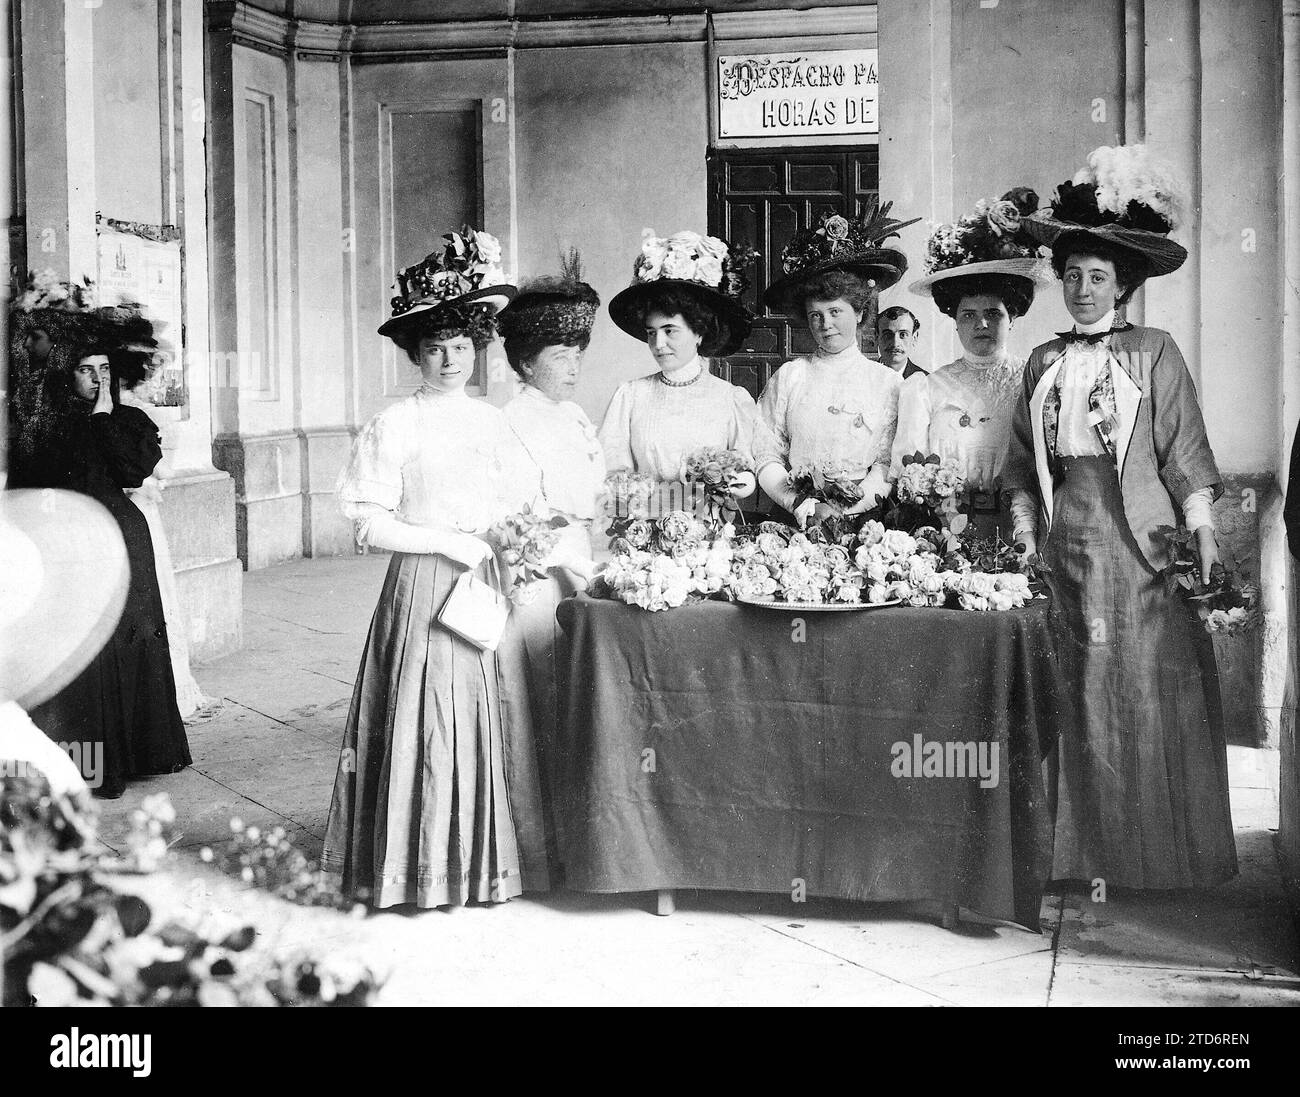 05/28/1908. Madrid. The blessing of the Roses. The atrium of the church of San José during the function organized by the Ladies of the Talleres de Santa Rita, in honor of their Patron. A Flower Stand Served by Distinguished Ladies. Credit: Album / Archivo ABC / Francisco Goñi Stock Photo